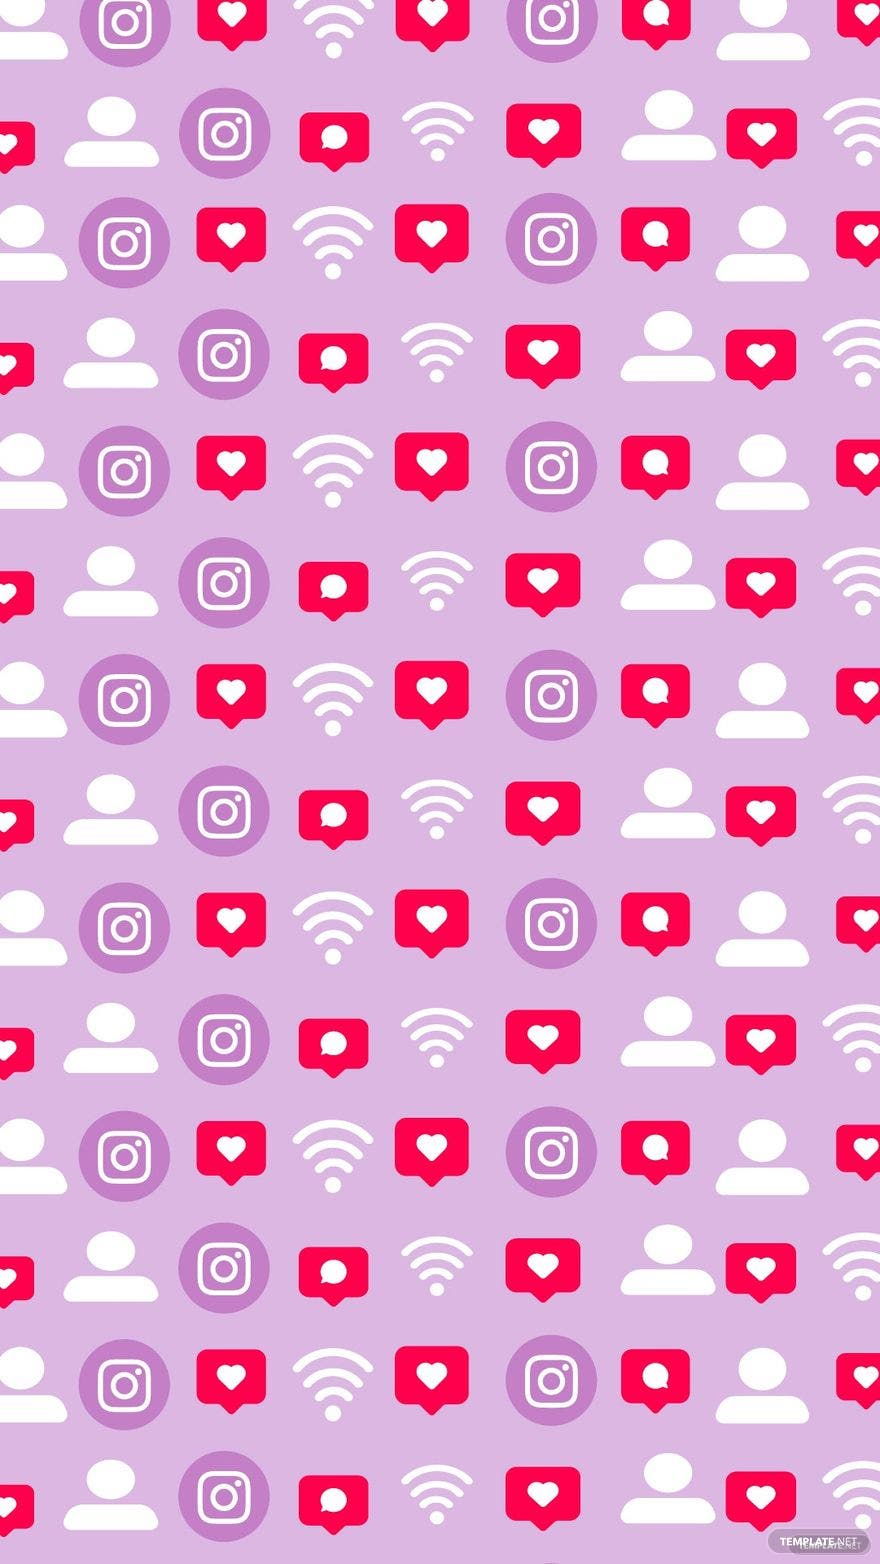 A pattern of hearts and people on pink background - Heart